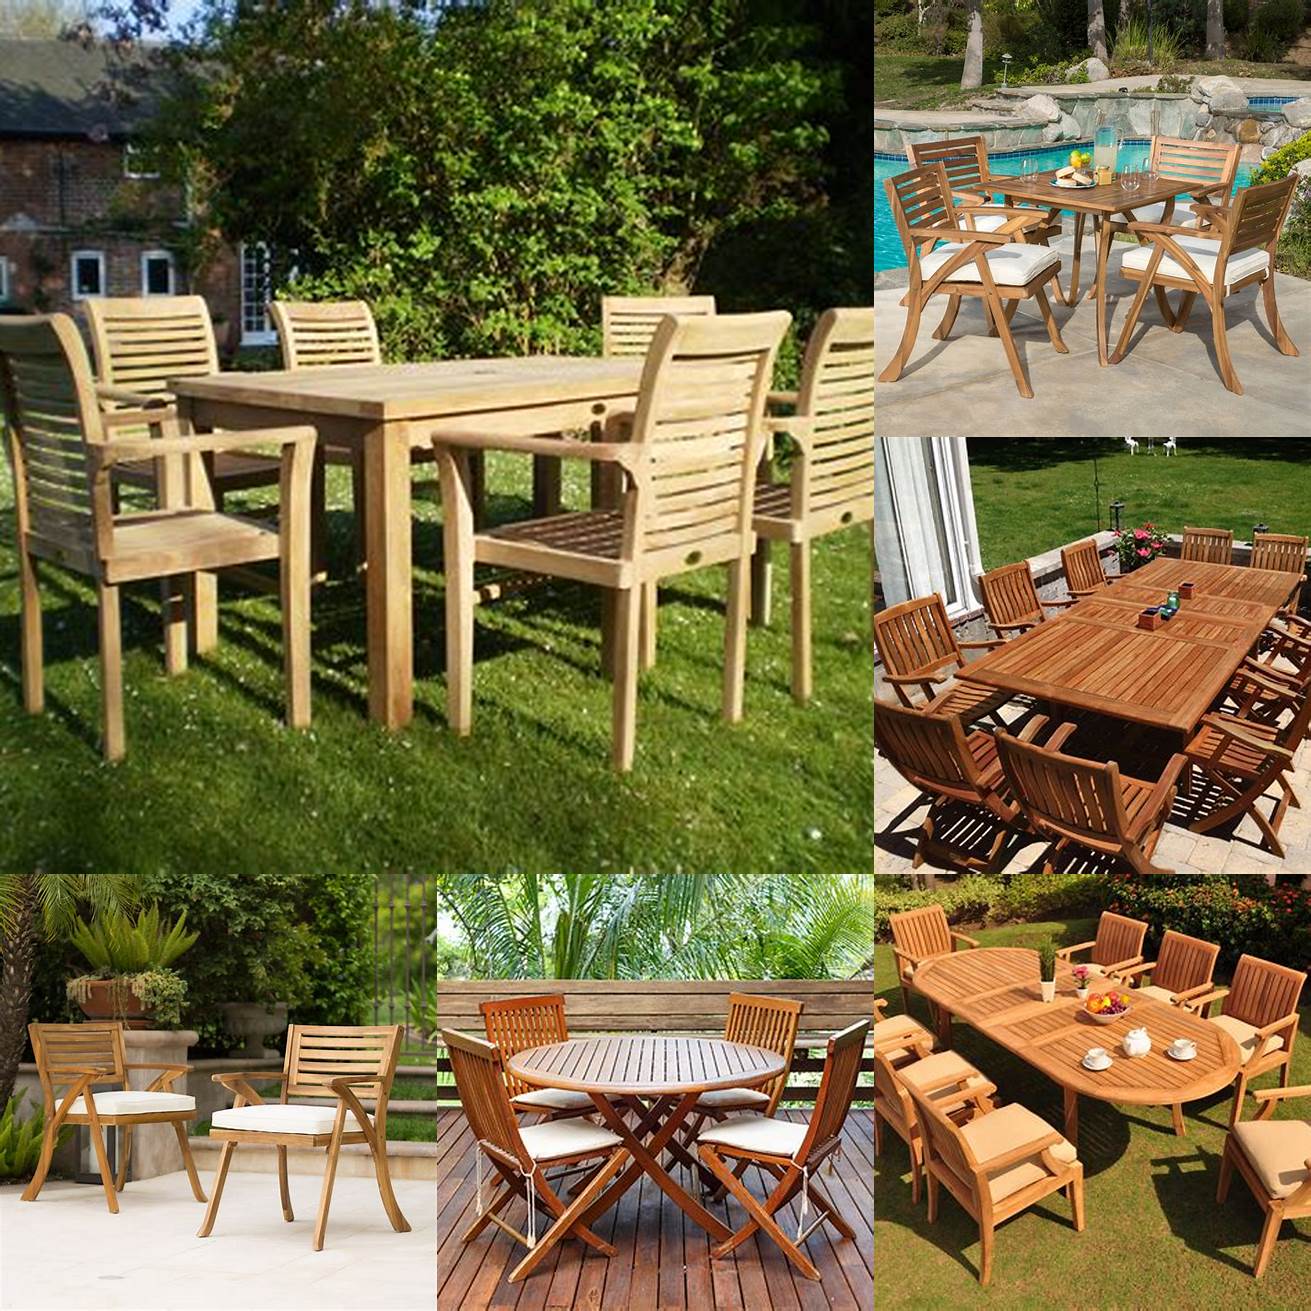 Teak Wood Patio Furniture in a Country Setting